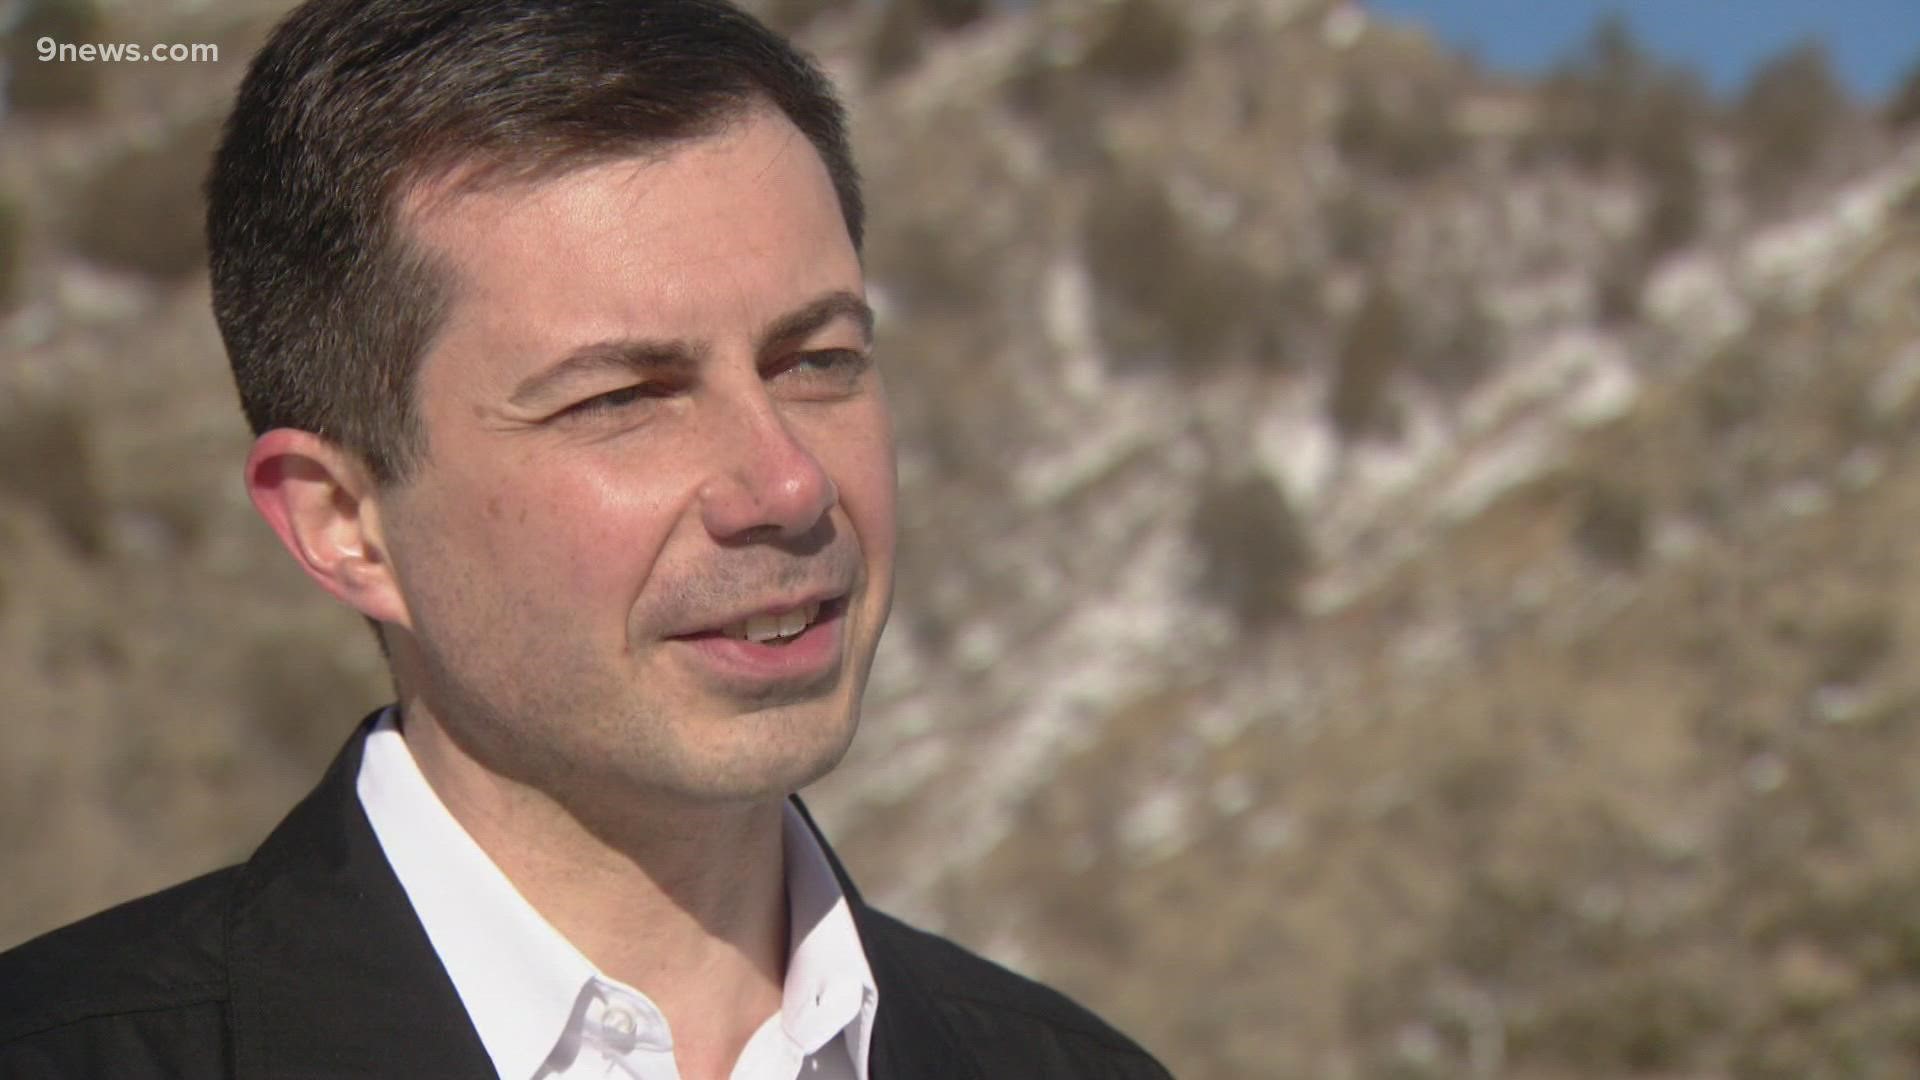 Transportation Secretary Pete Buttigieg came to Colorado to promote improvements as a result of the President Biden's infrastructure plan passed by Congress.